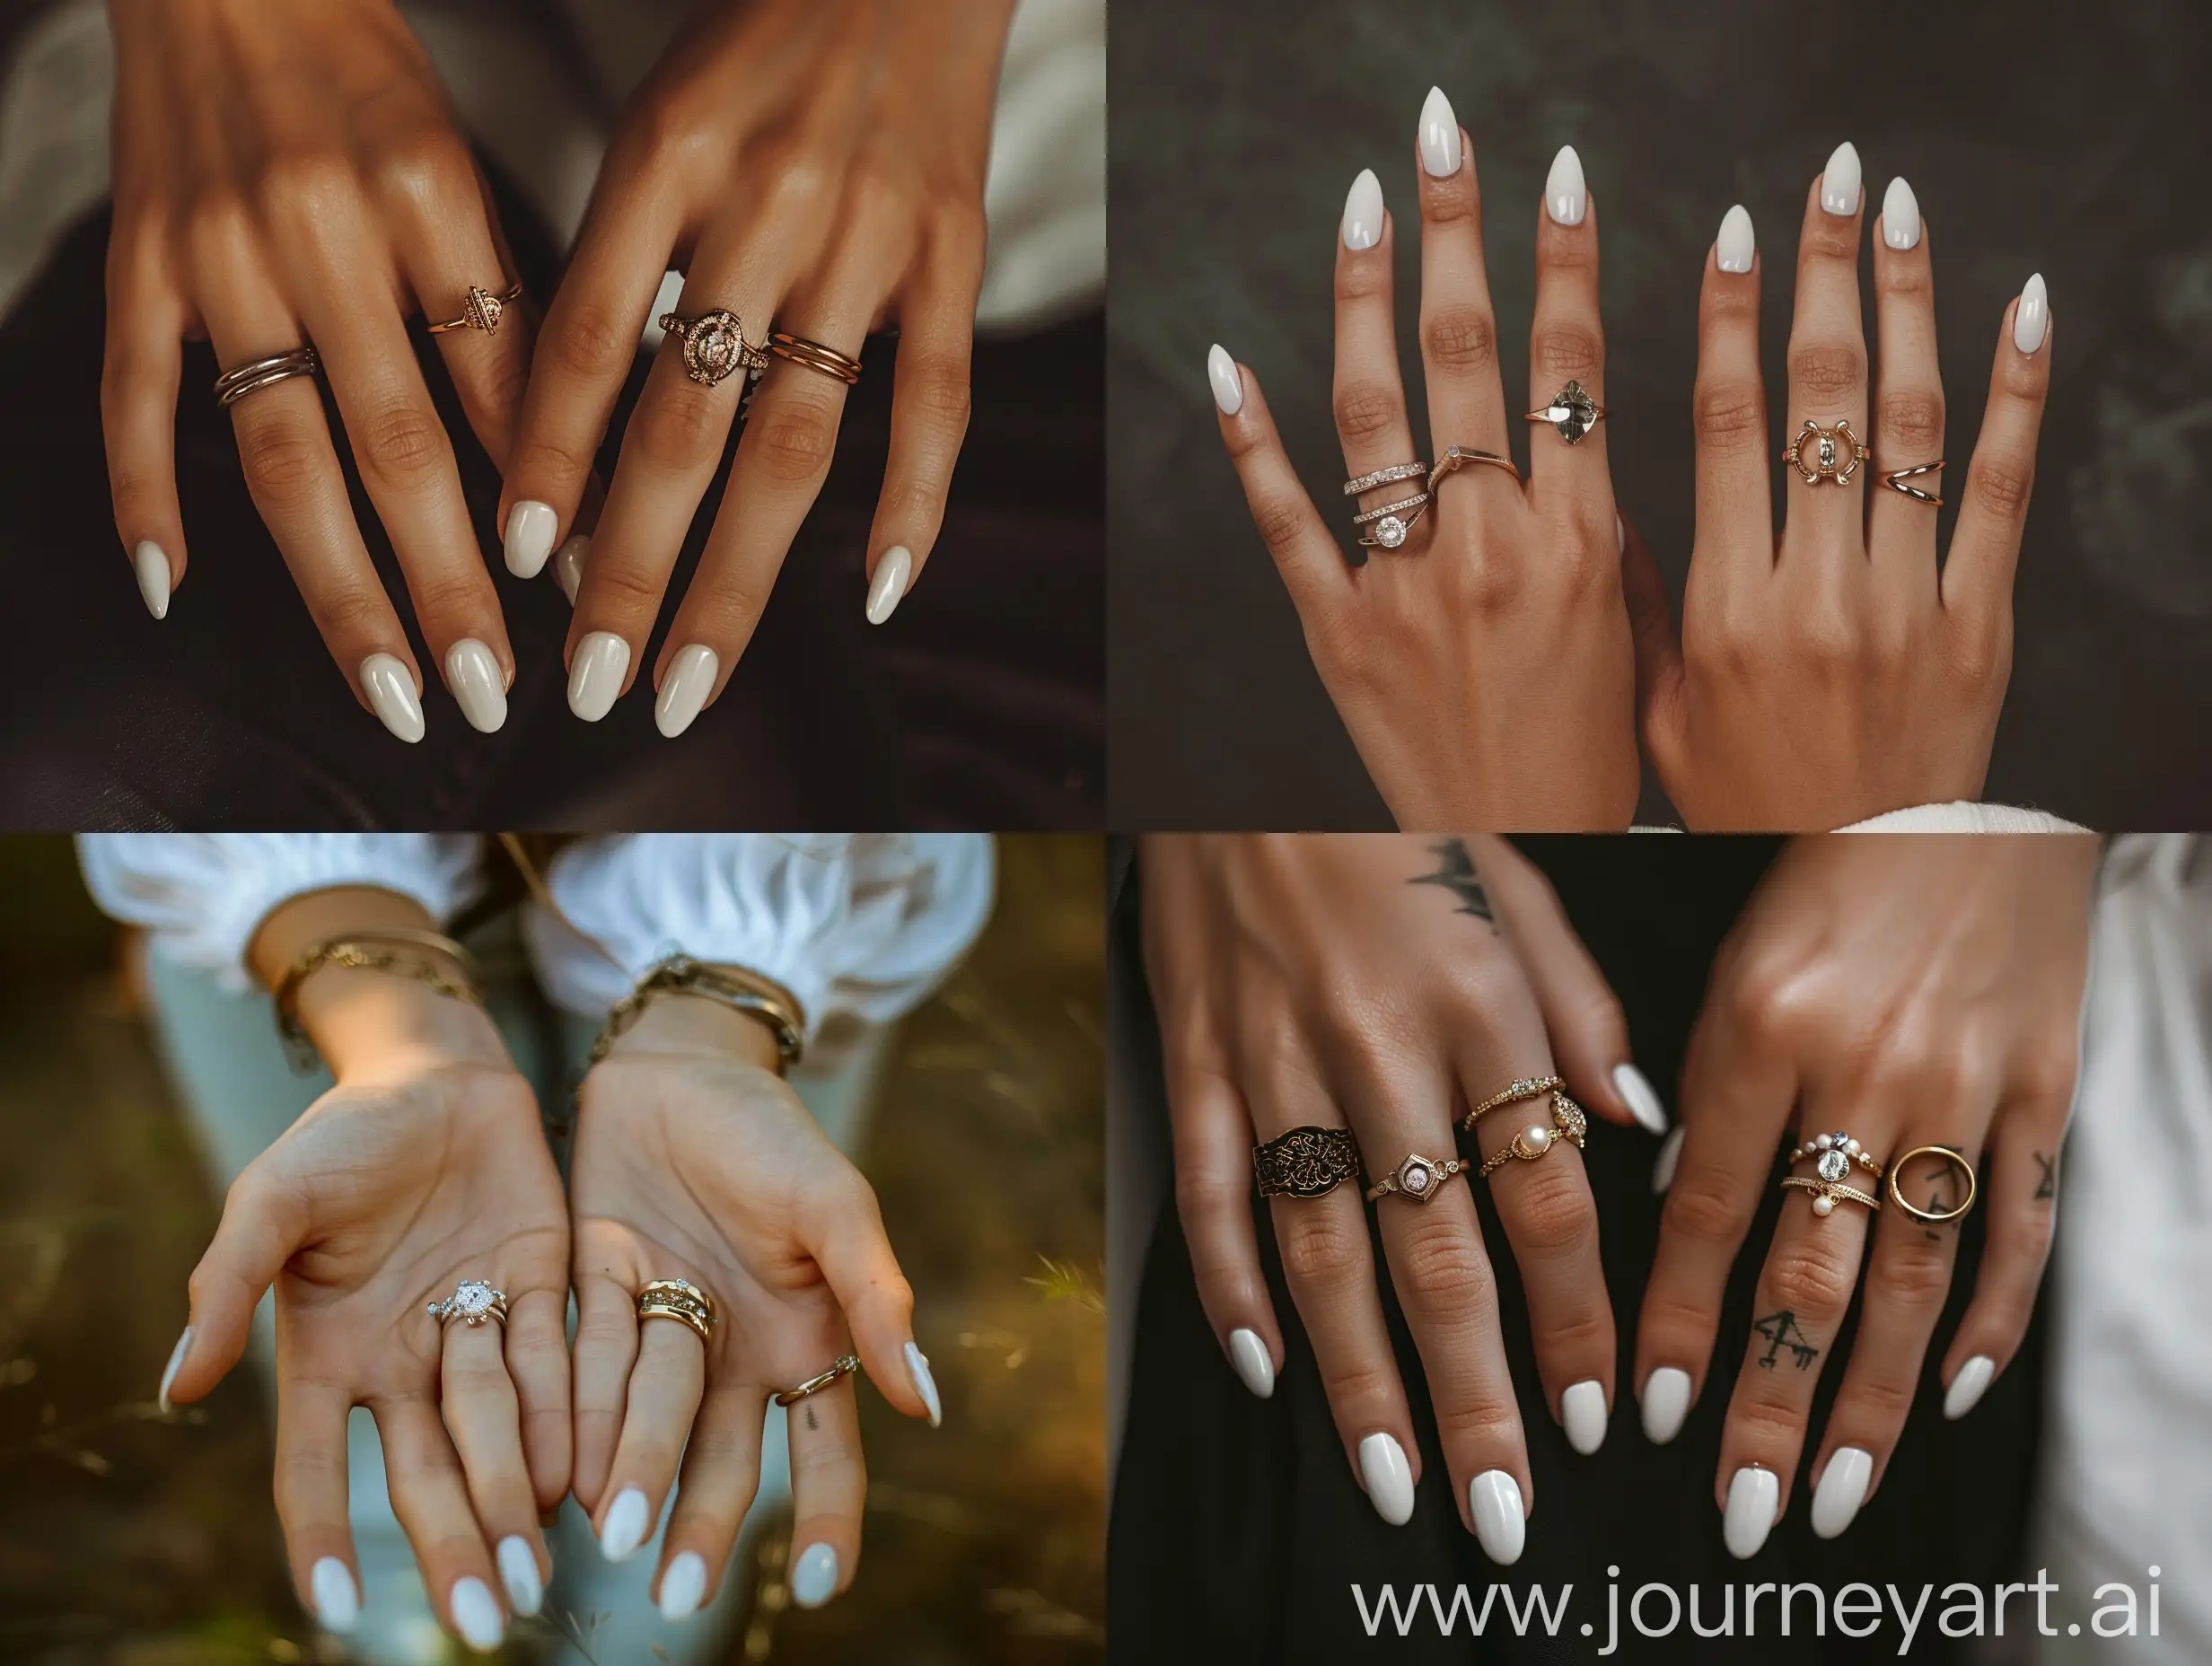 Aesthetic instagram photograph of a pair of slender hands, teenage girl hands, trendy rings, white gel nail polish, close up, professional photograph